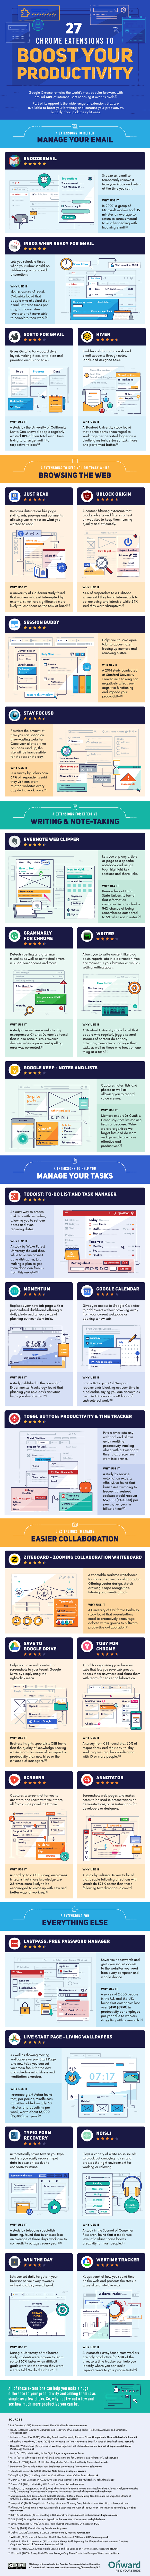 27 Chrome Extensions to Boost Your Productivity #infographic